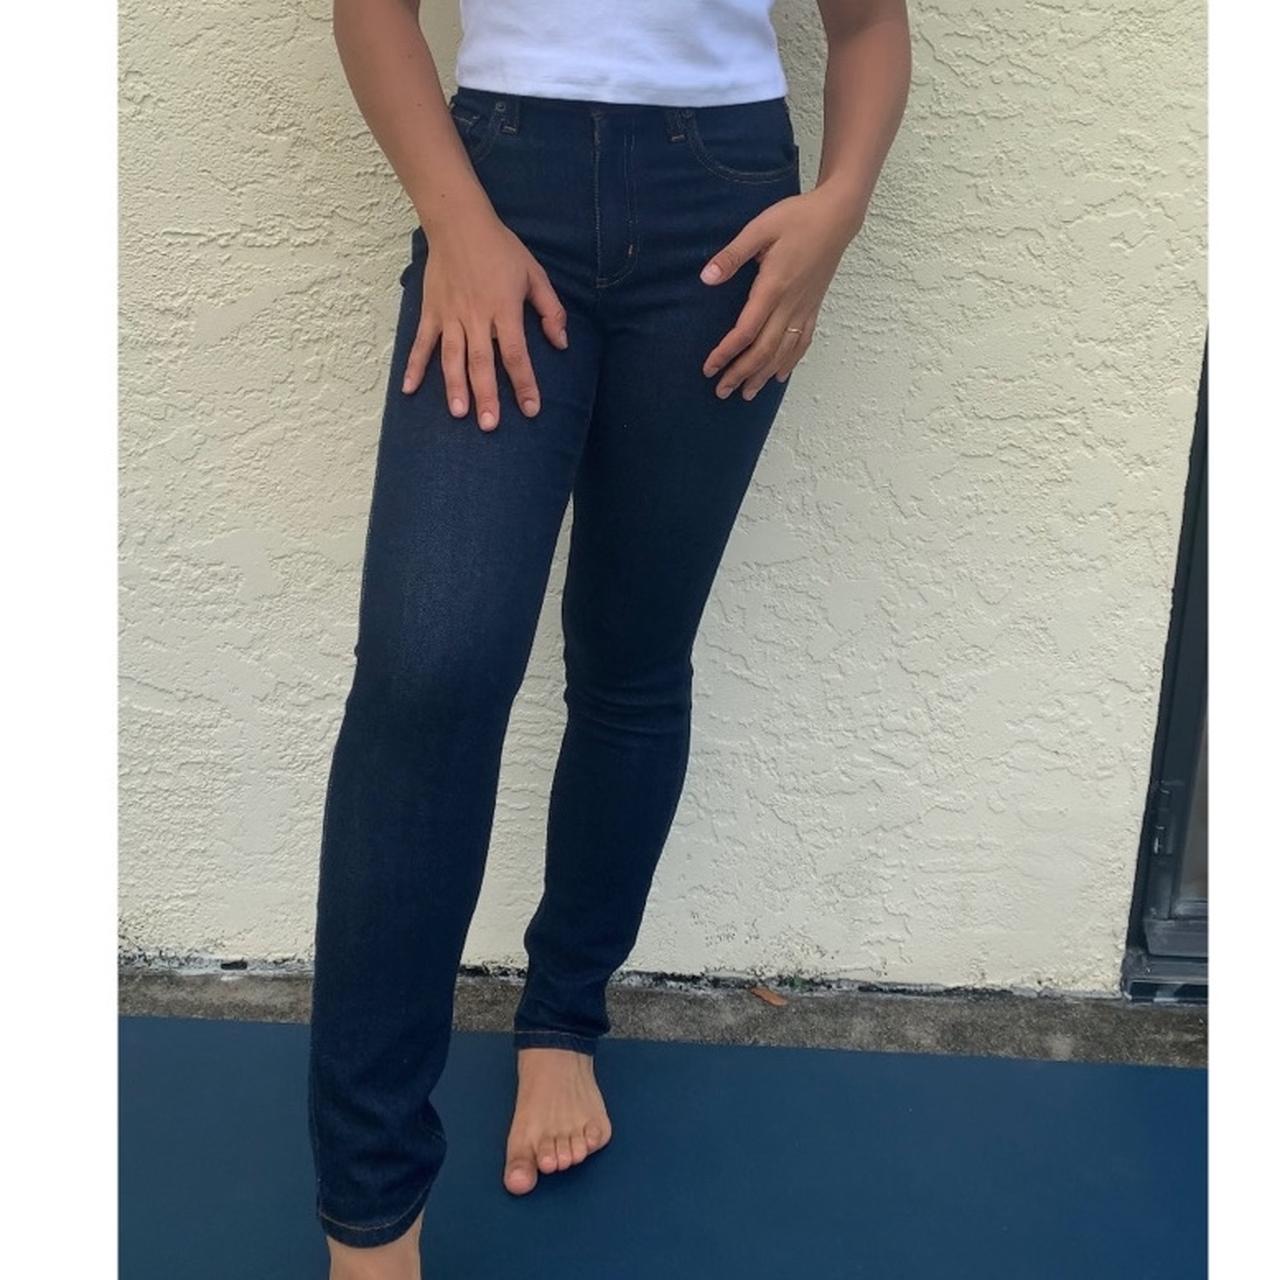 🌍Yoga Jeans dark wash skinny. New without tags. - Depop